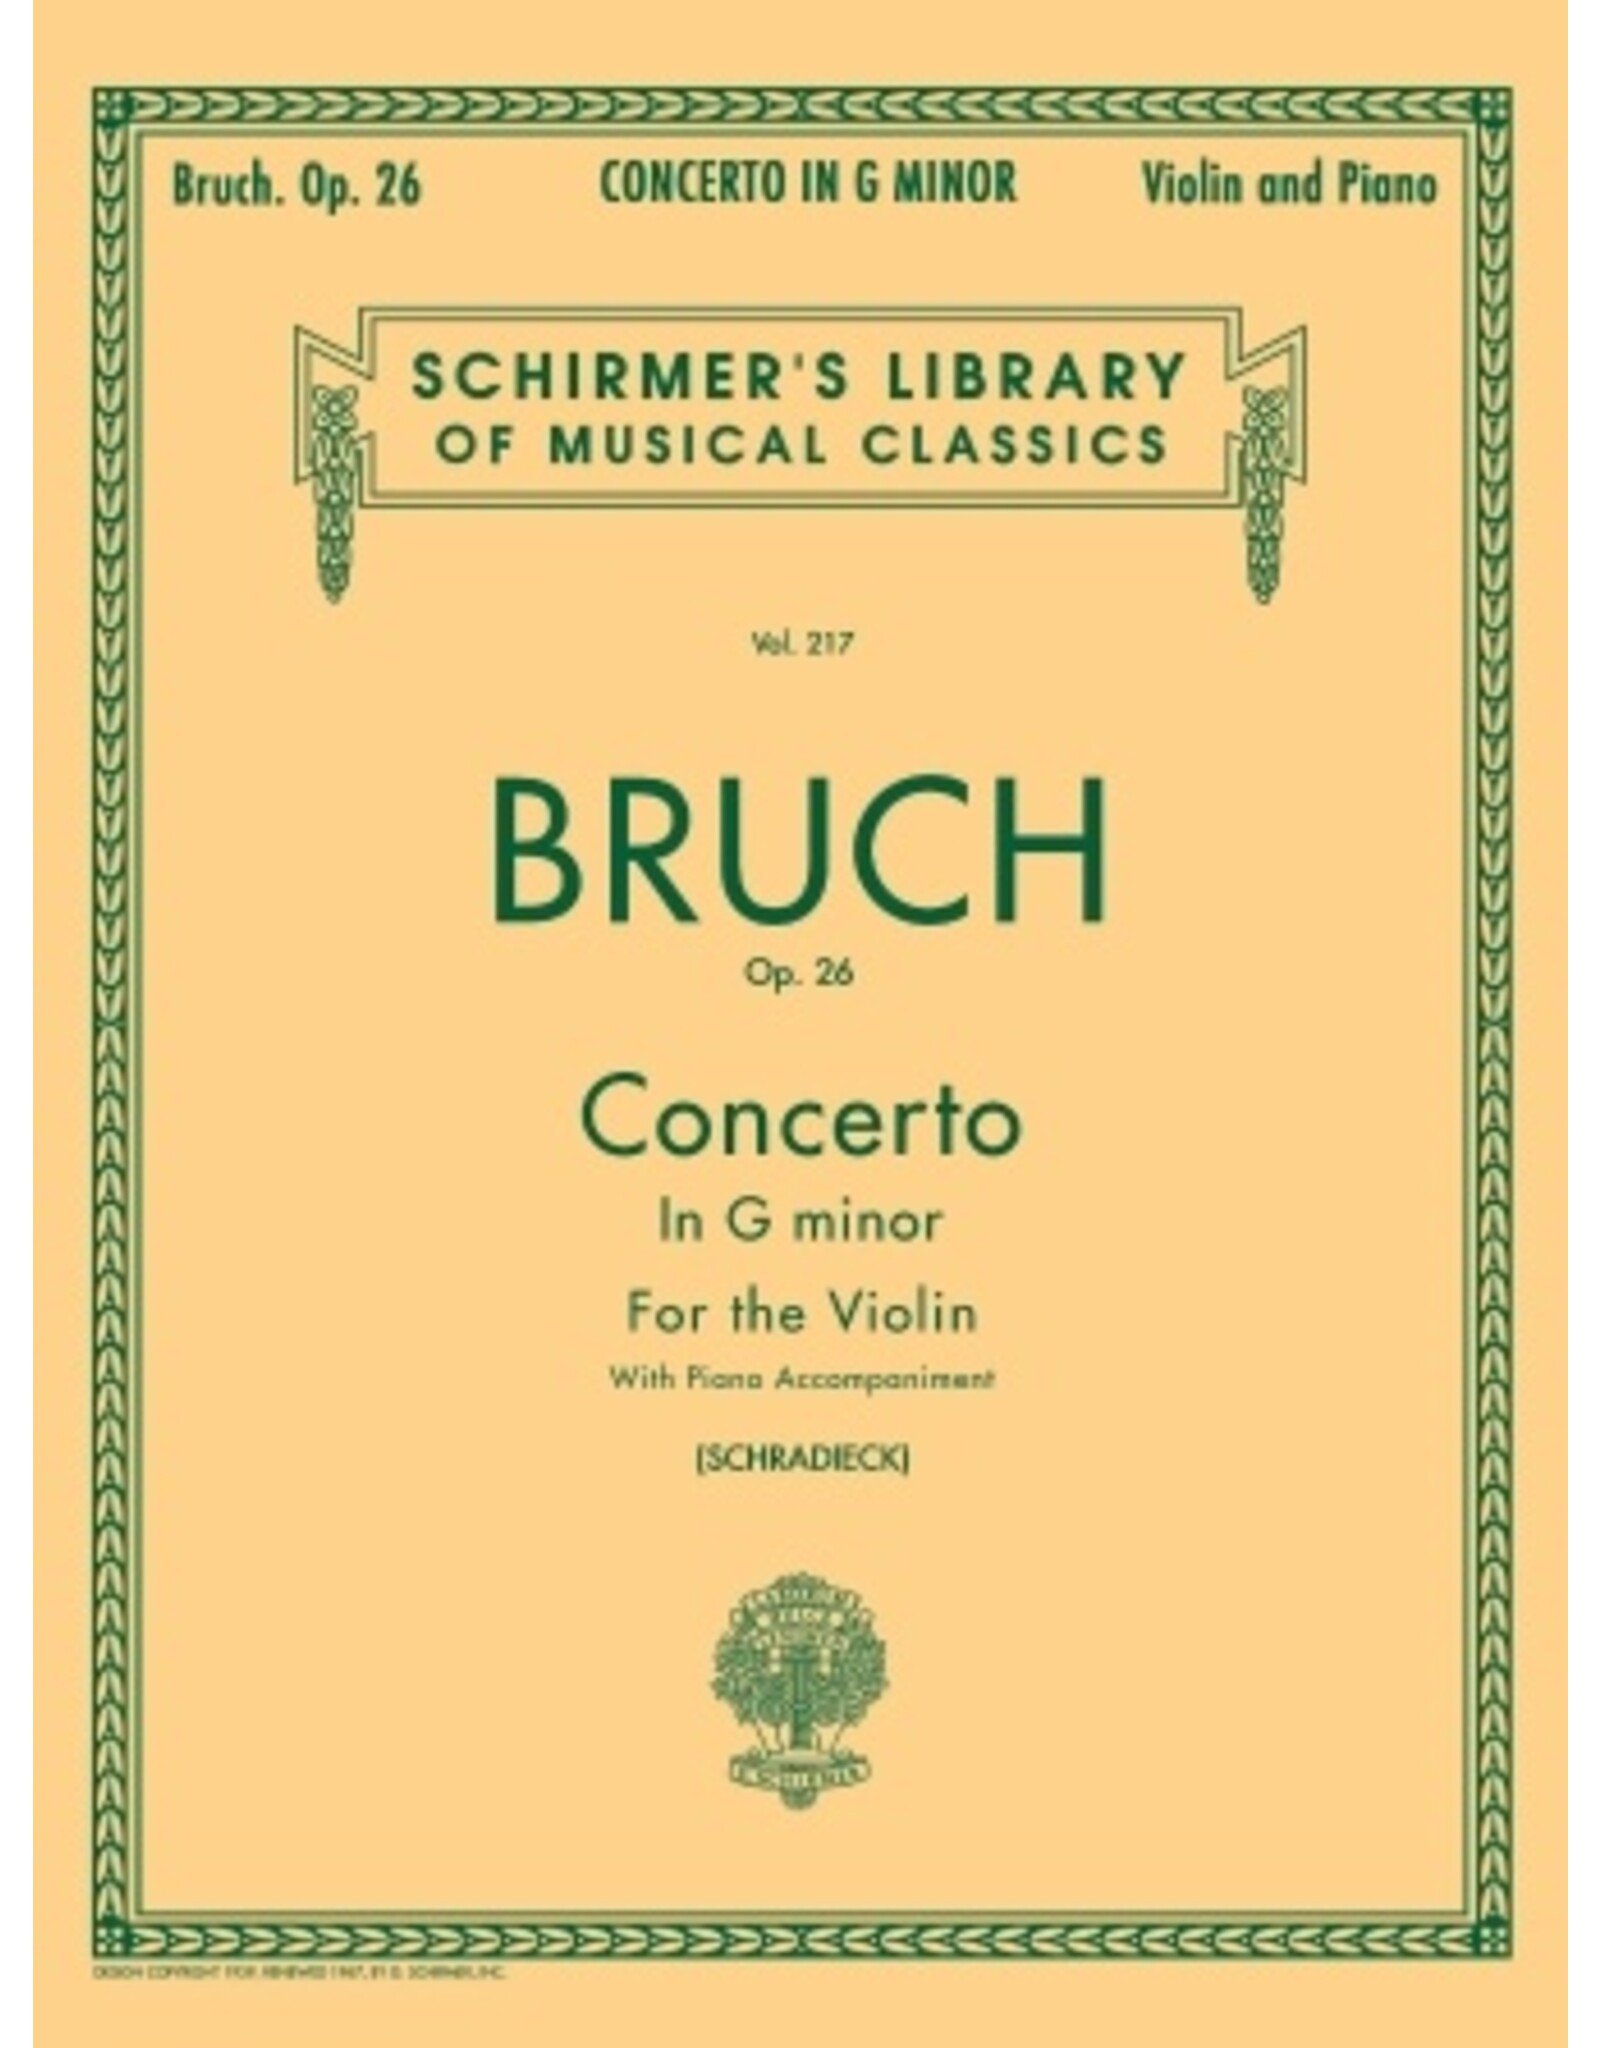 Hal Leonard Bruch - Concerto in G Minor, Op. 26 Score and Parts (Schradieck) String Solo